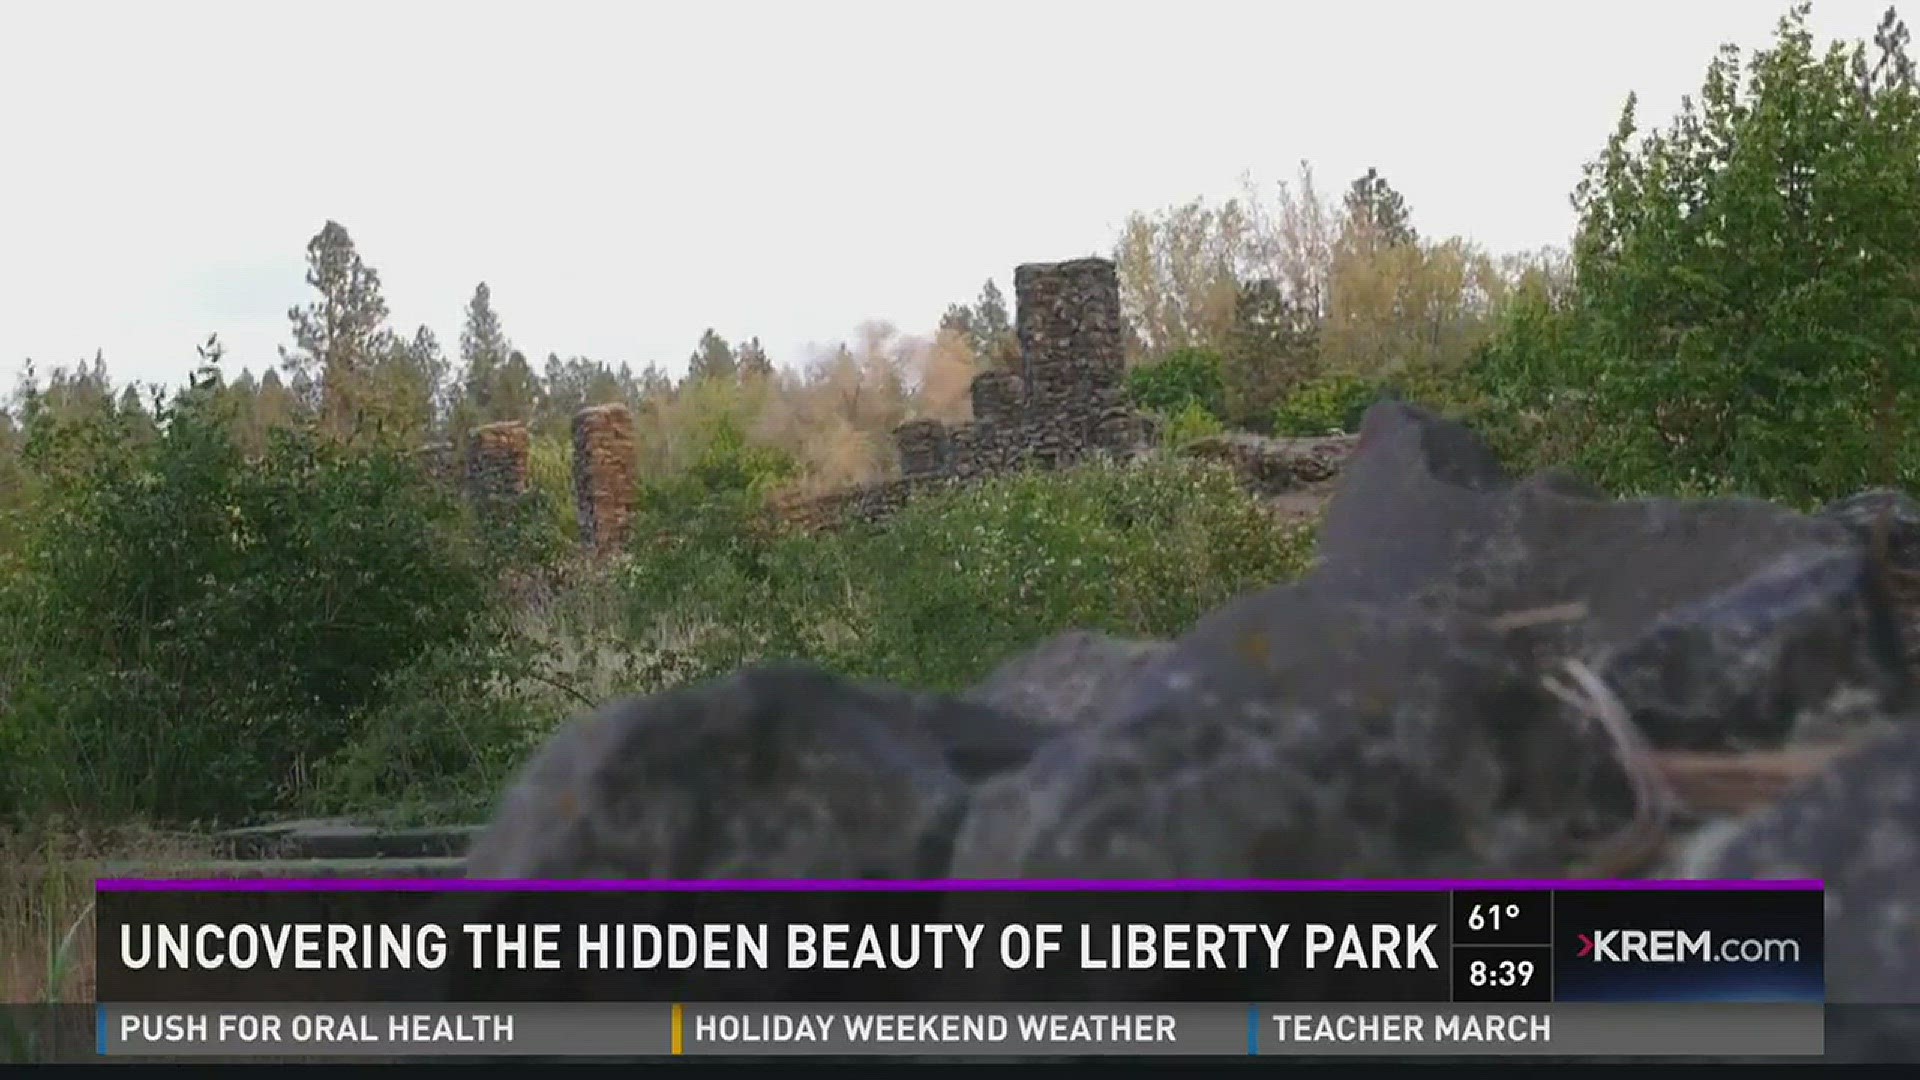 KREM 2 News is bringing you #HiddenSpokane all week, showcasing some of the hidden gems of the city. For Wednesday: Liberty Park